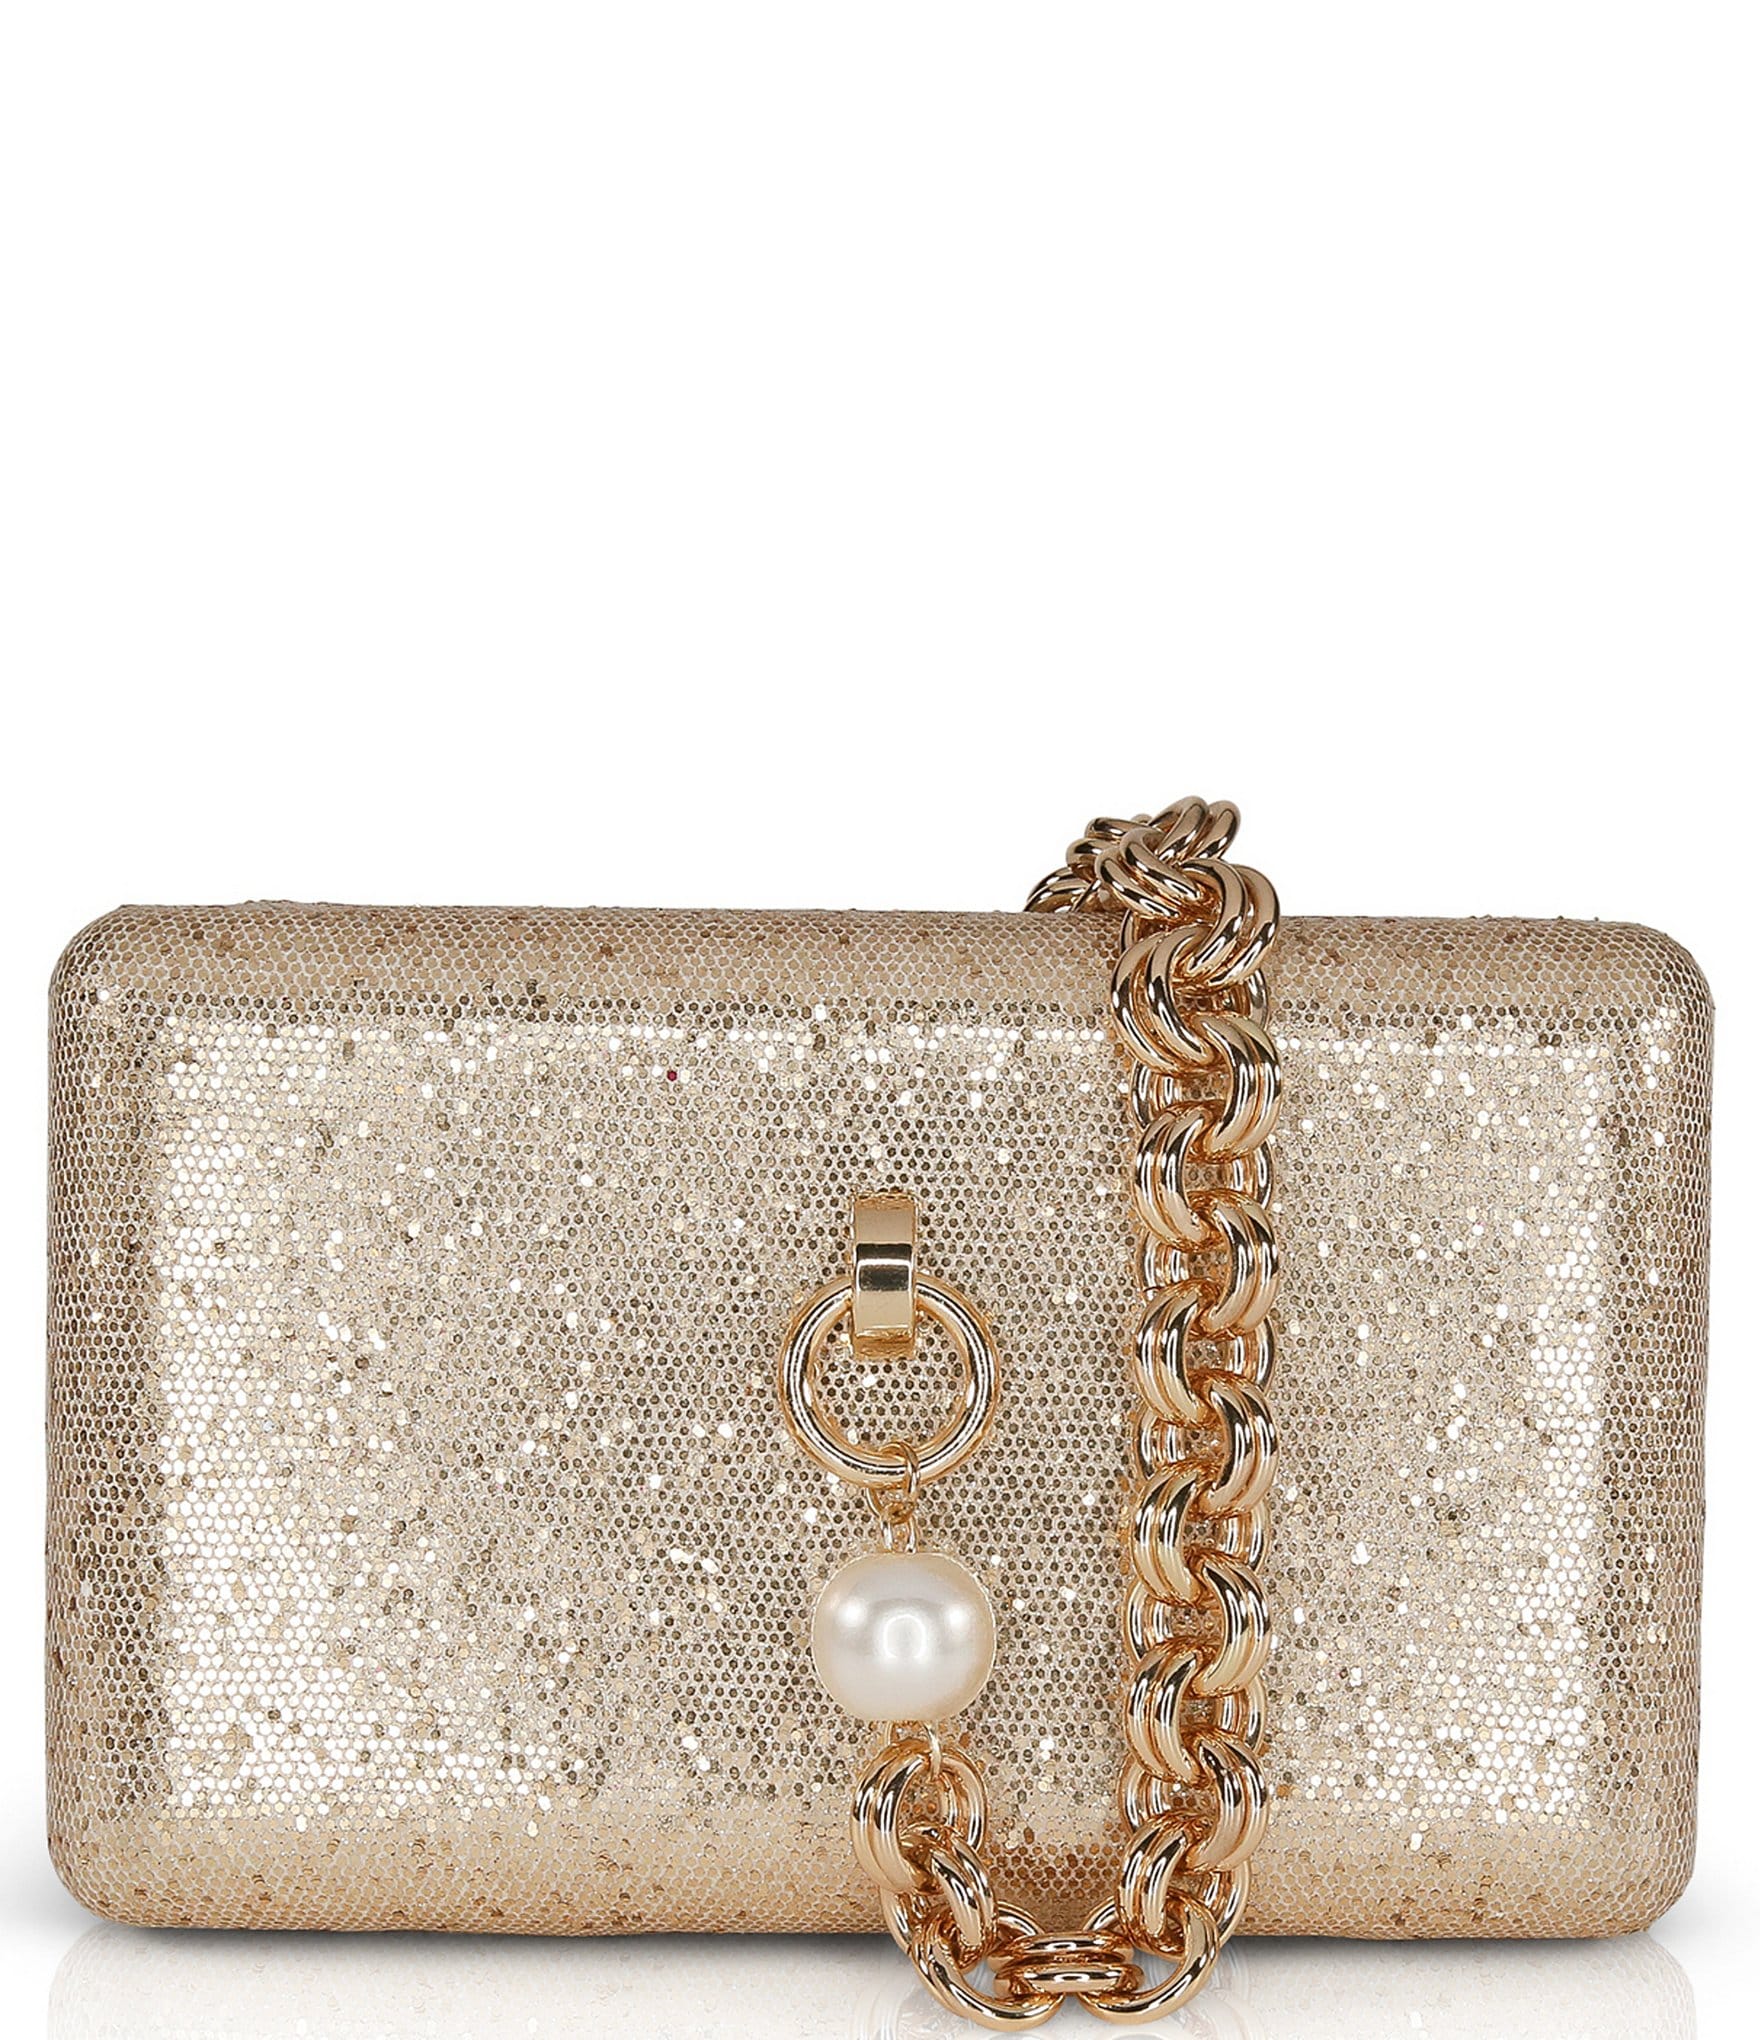 Gold Sequins Top Handle Evening Box Clutch Purse With Chain Strap